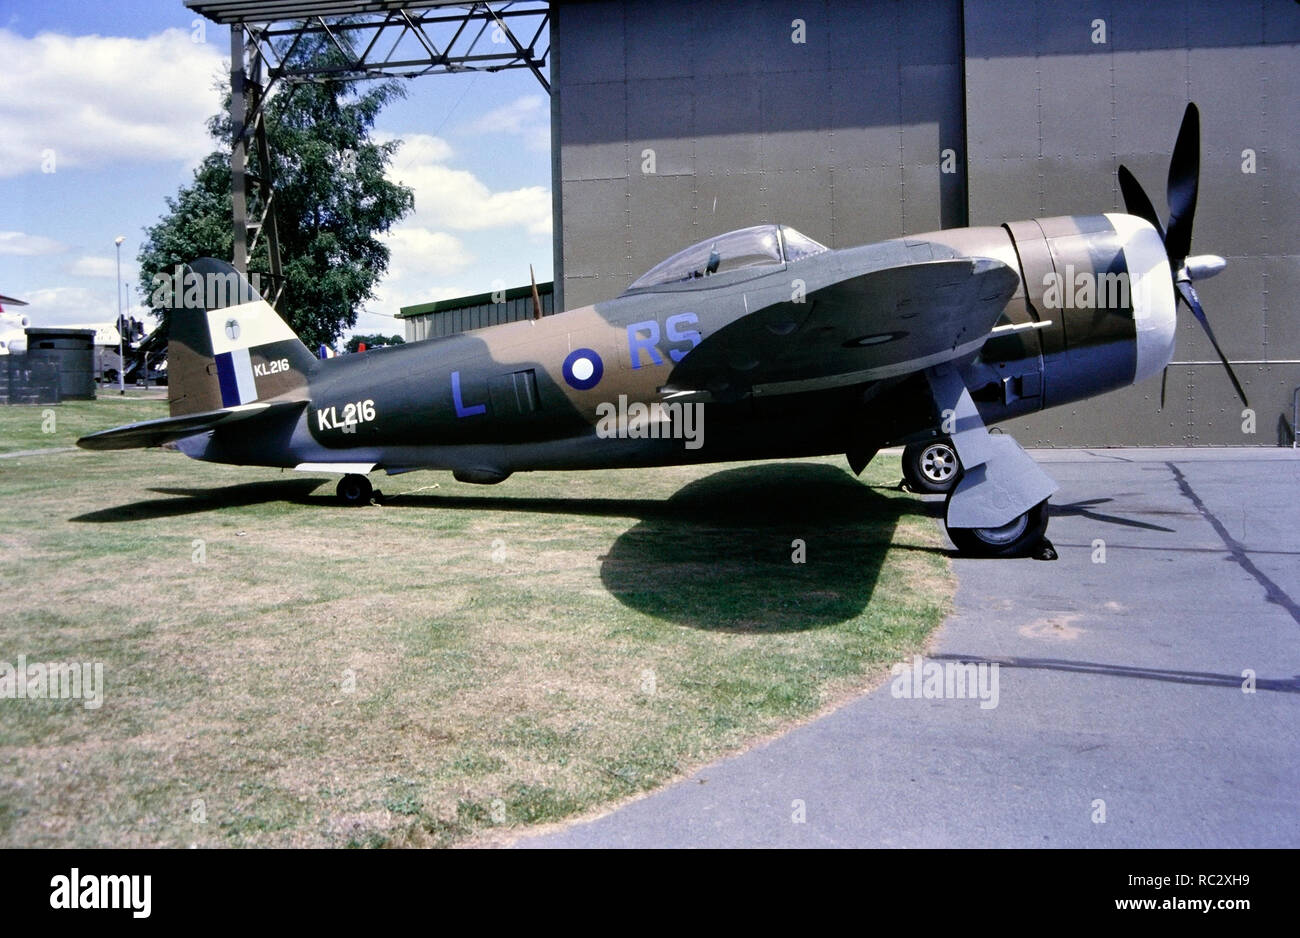 P-47D Thunderbolt fighter aircraft, RAF Cosford 1995 Stock Photo